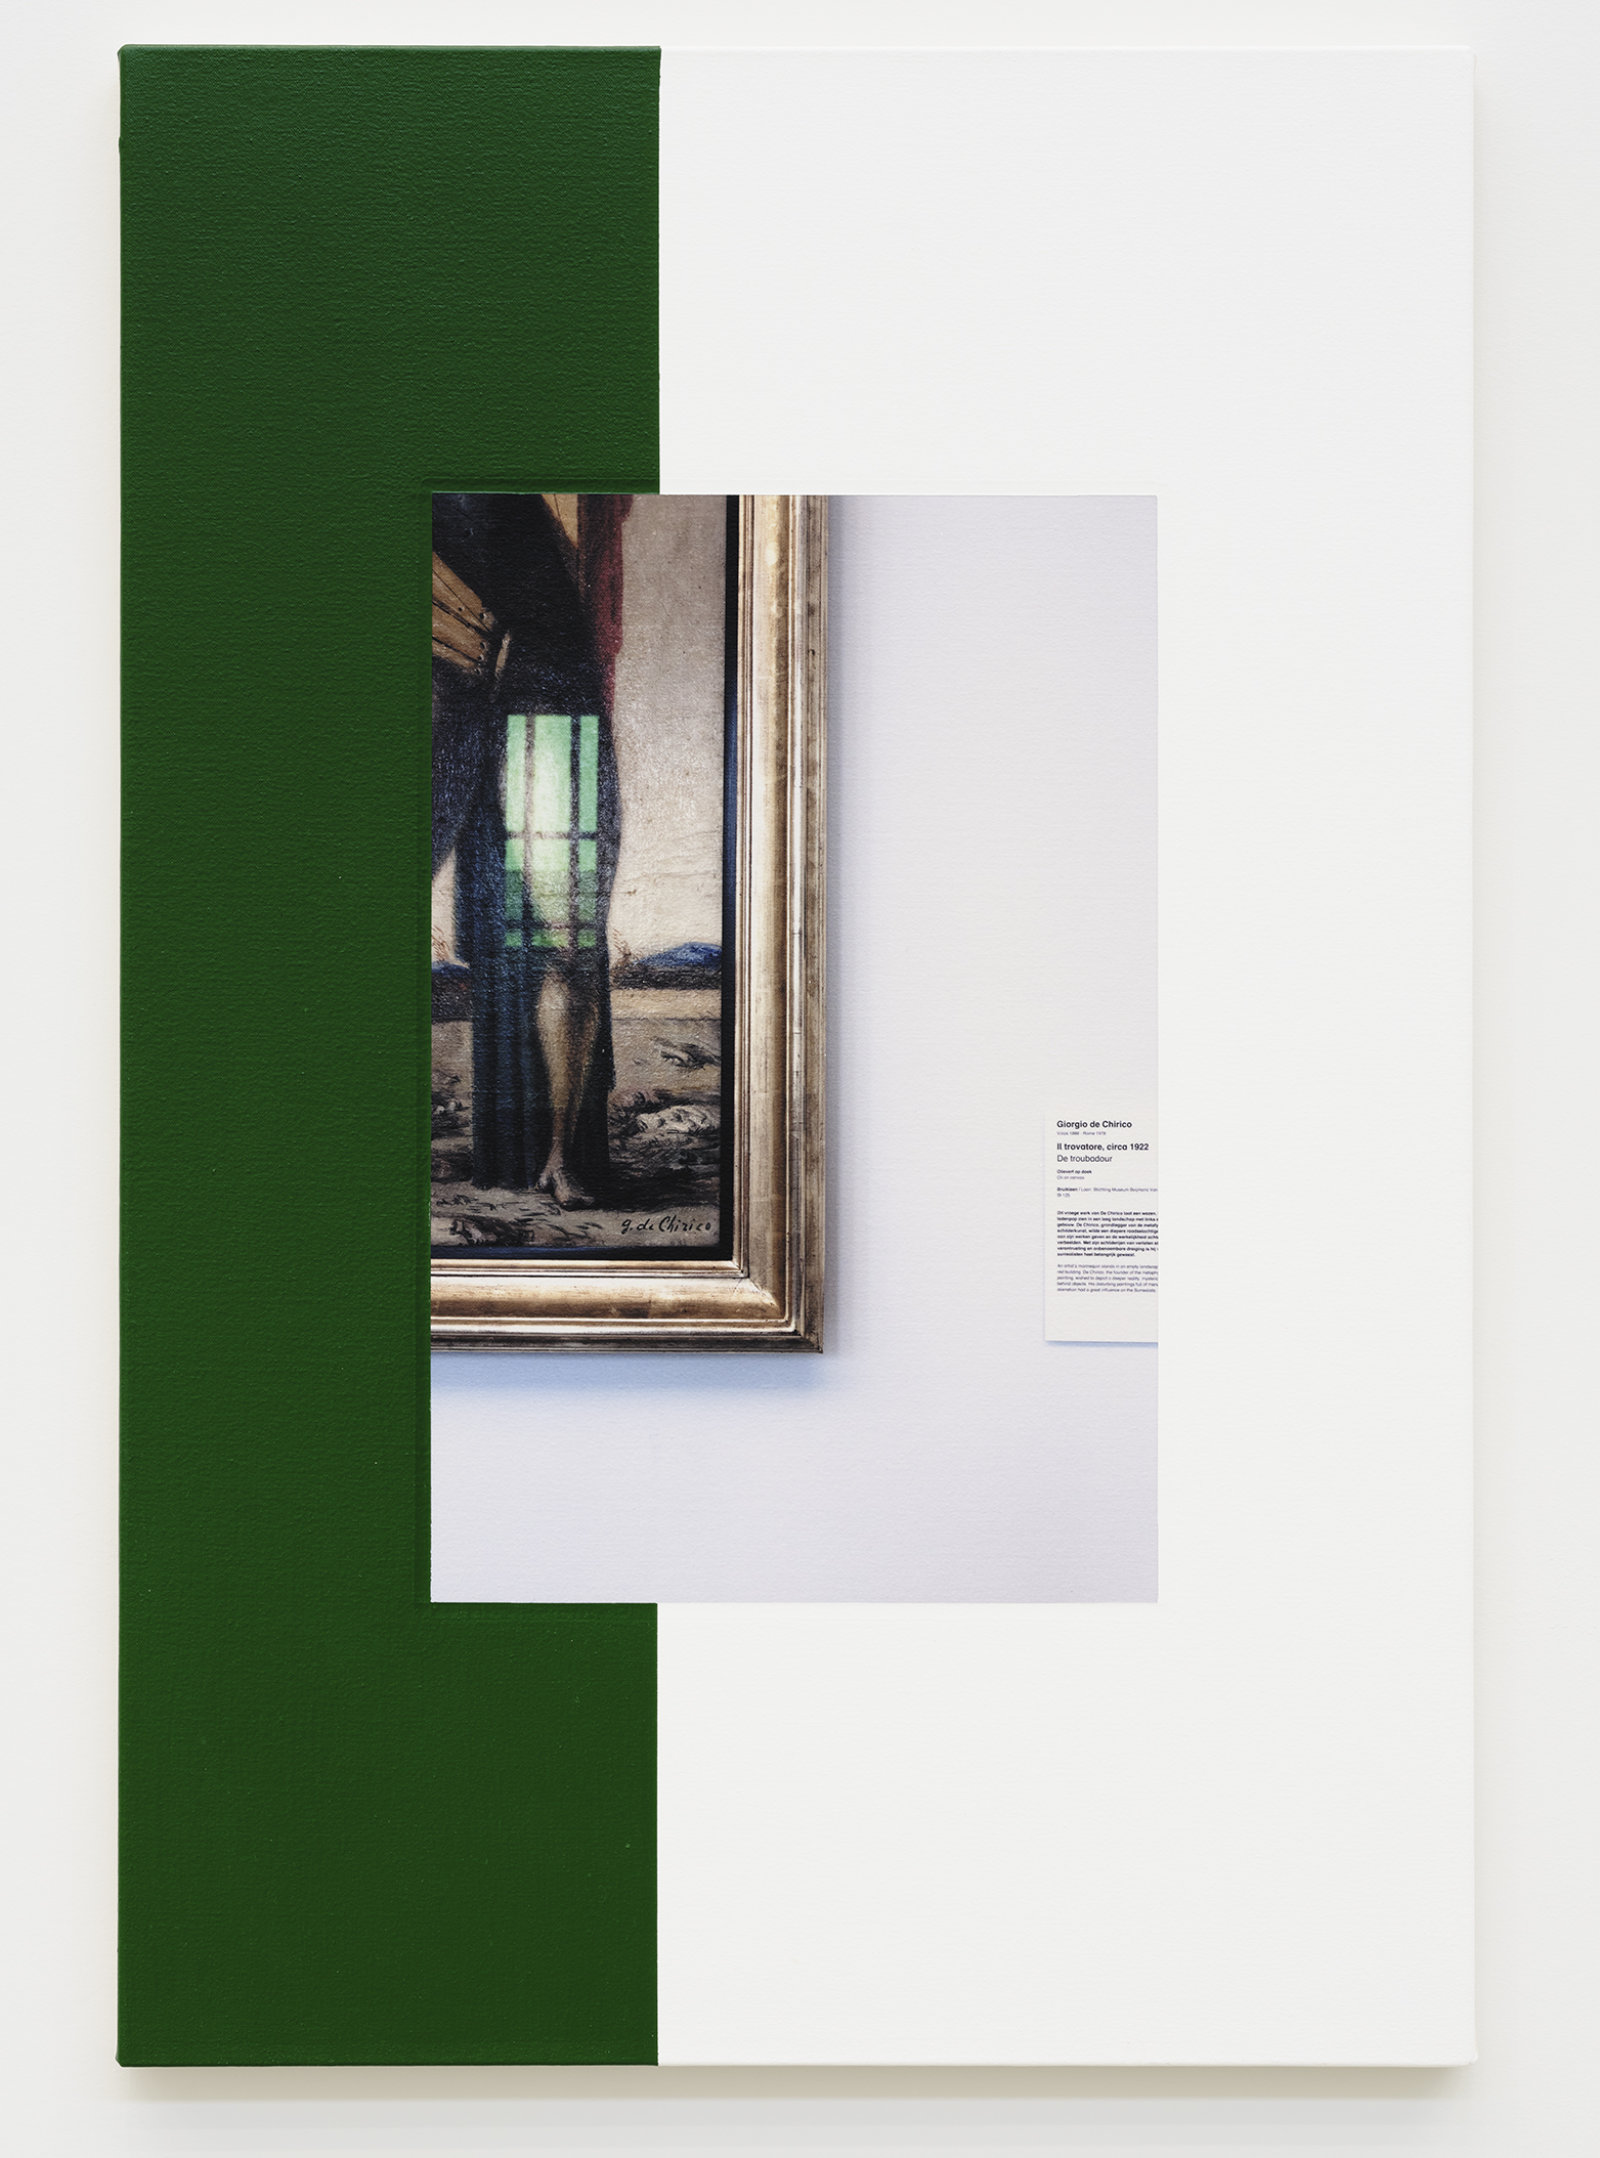 Ian Wallace, Abstract Composition (with de Chirico), 2011, photolaminate with acrylic on canvas, 36 x 24 in. (91 x 61 cm)